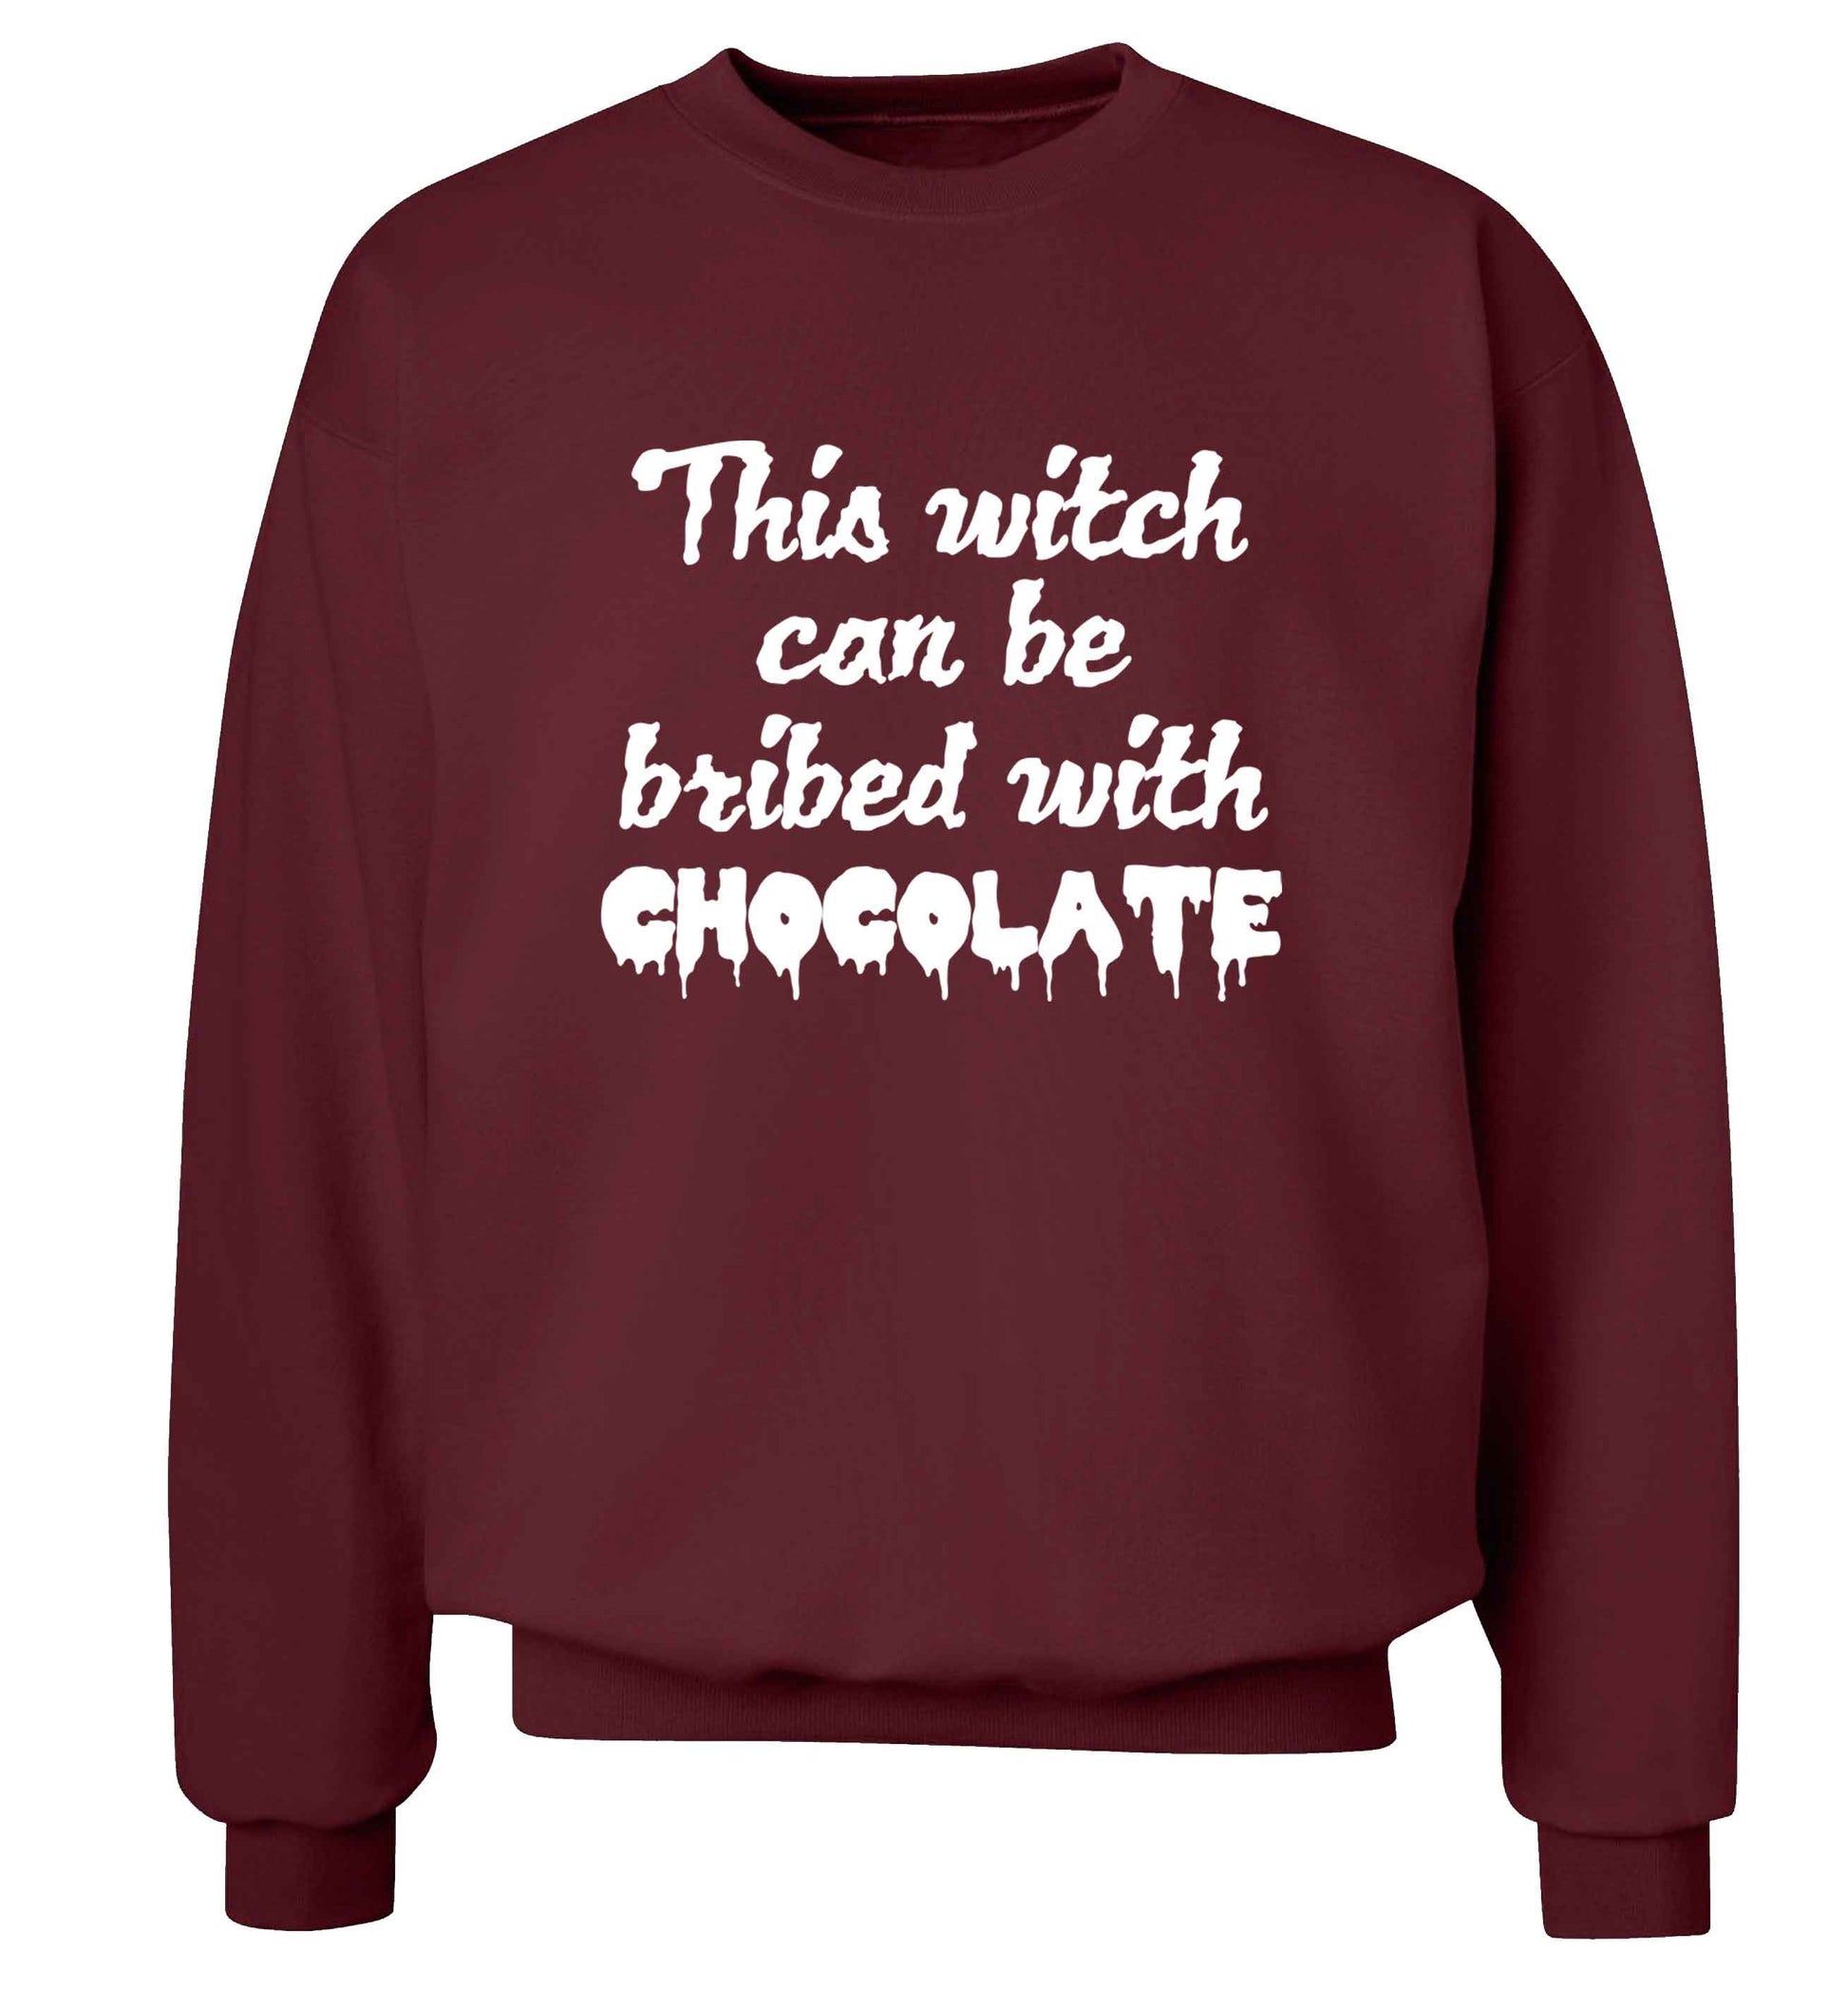 This witch can be bribed with chocolate adult's unisex maroon sweater 2XL